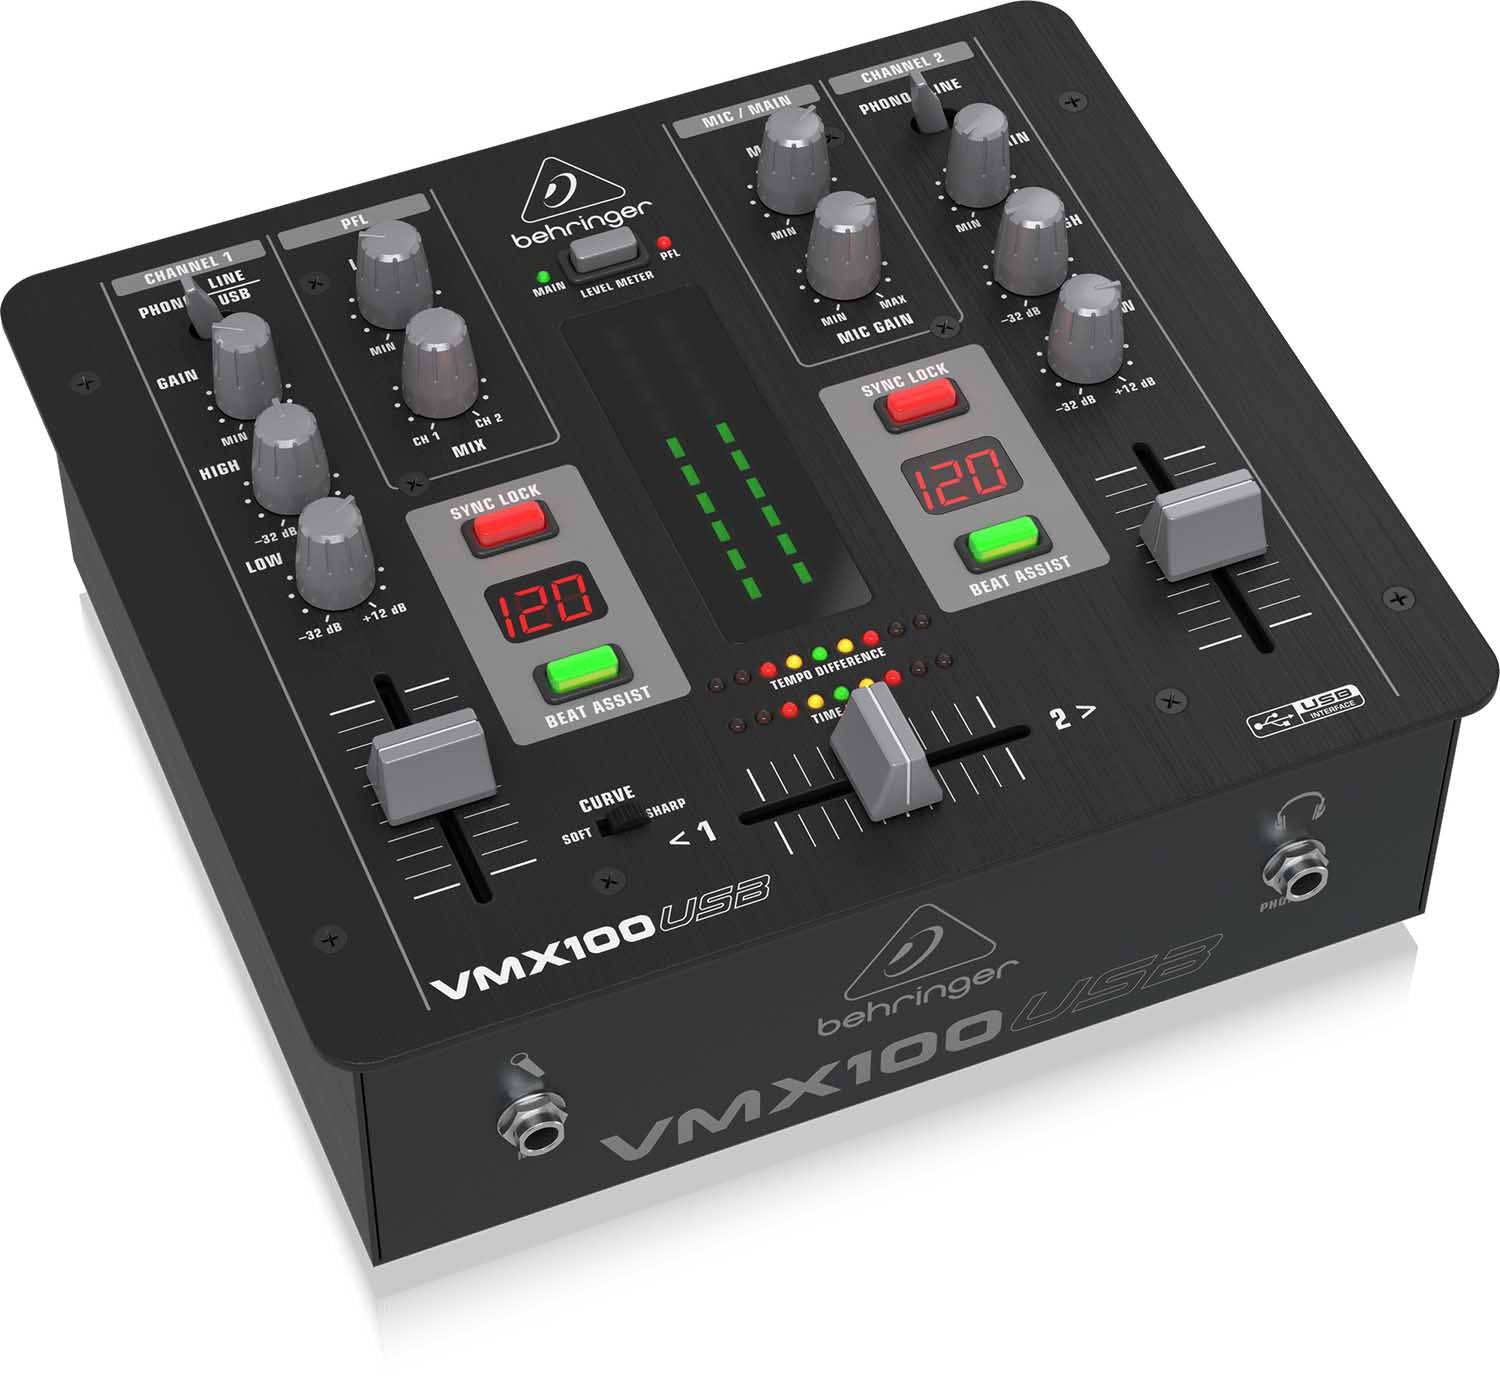 Behringer VMX100USB, 2 Channel DJ Mixer with USB/Audio Interface - Hollywood DJ